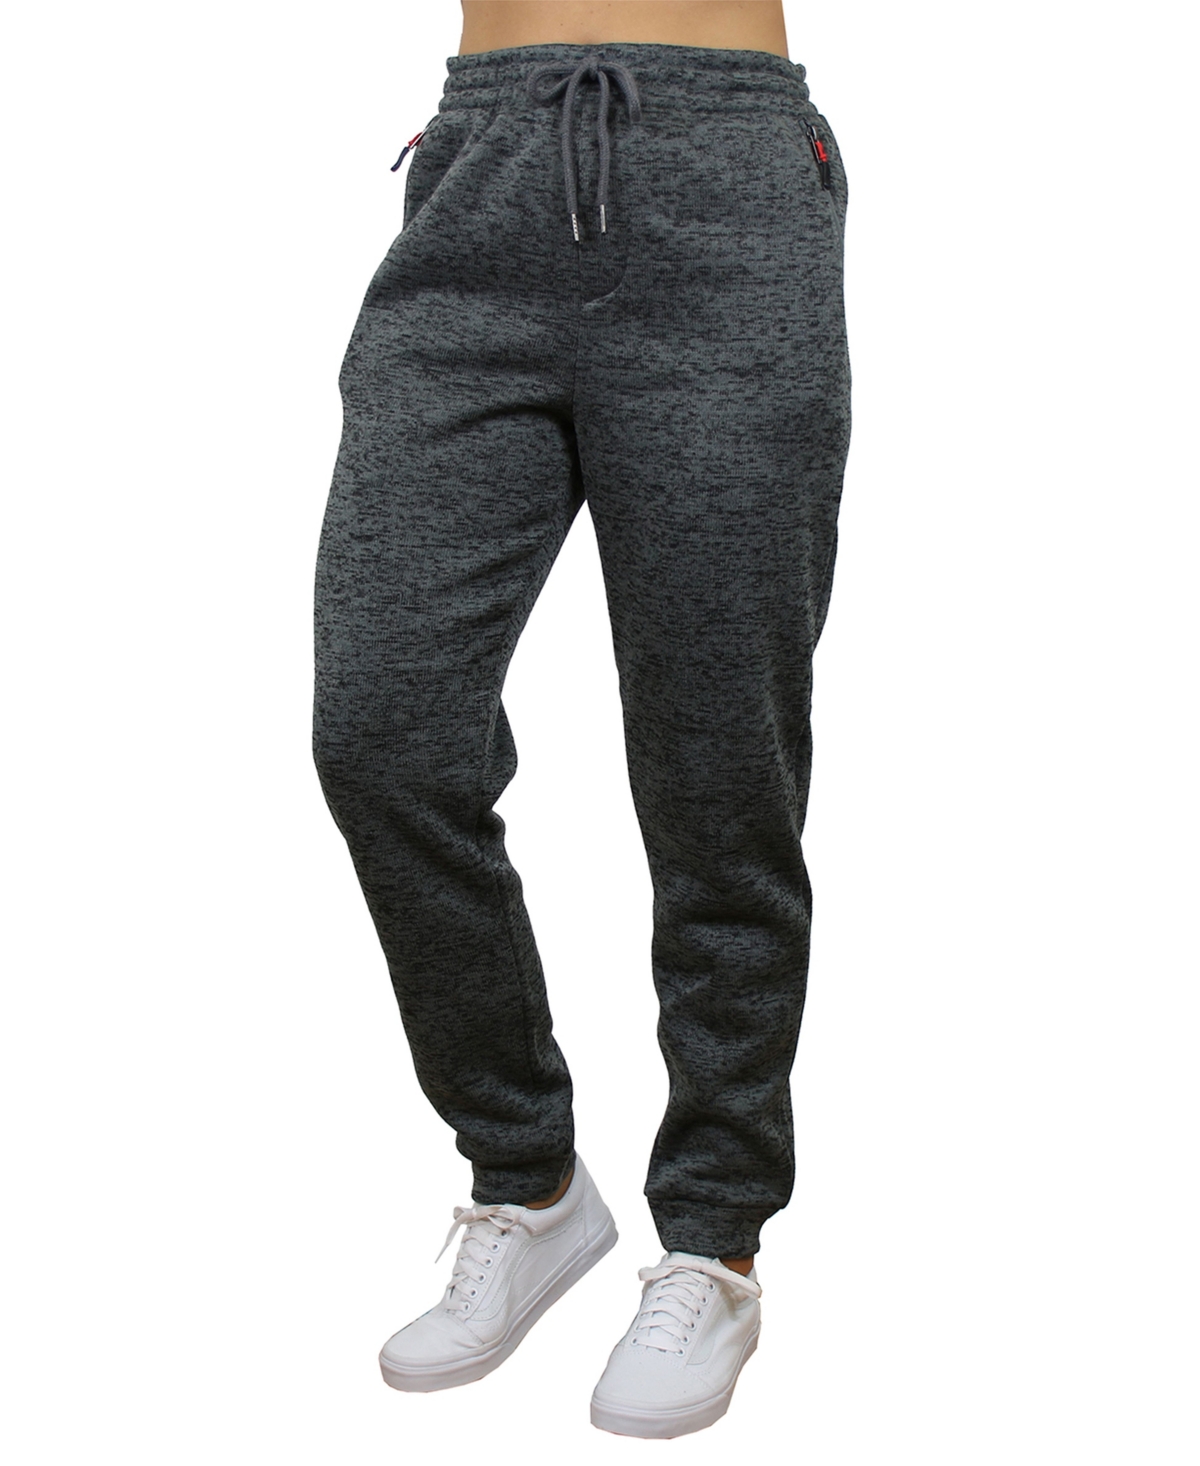 Women's Loose Fit Marled Fleece Joggers with Zipper Side Pockets - Gray